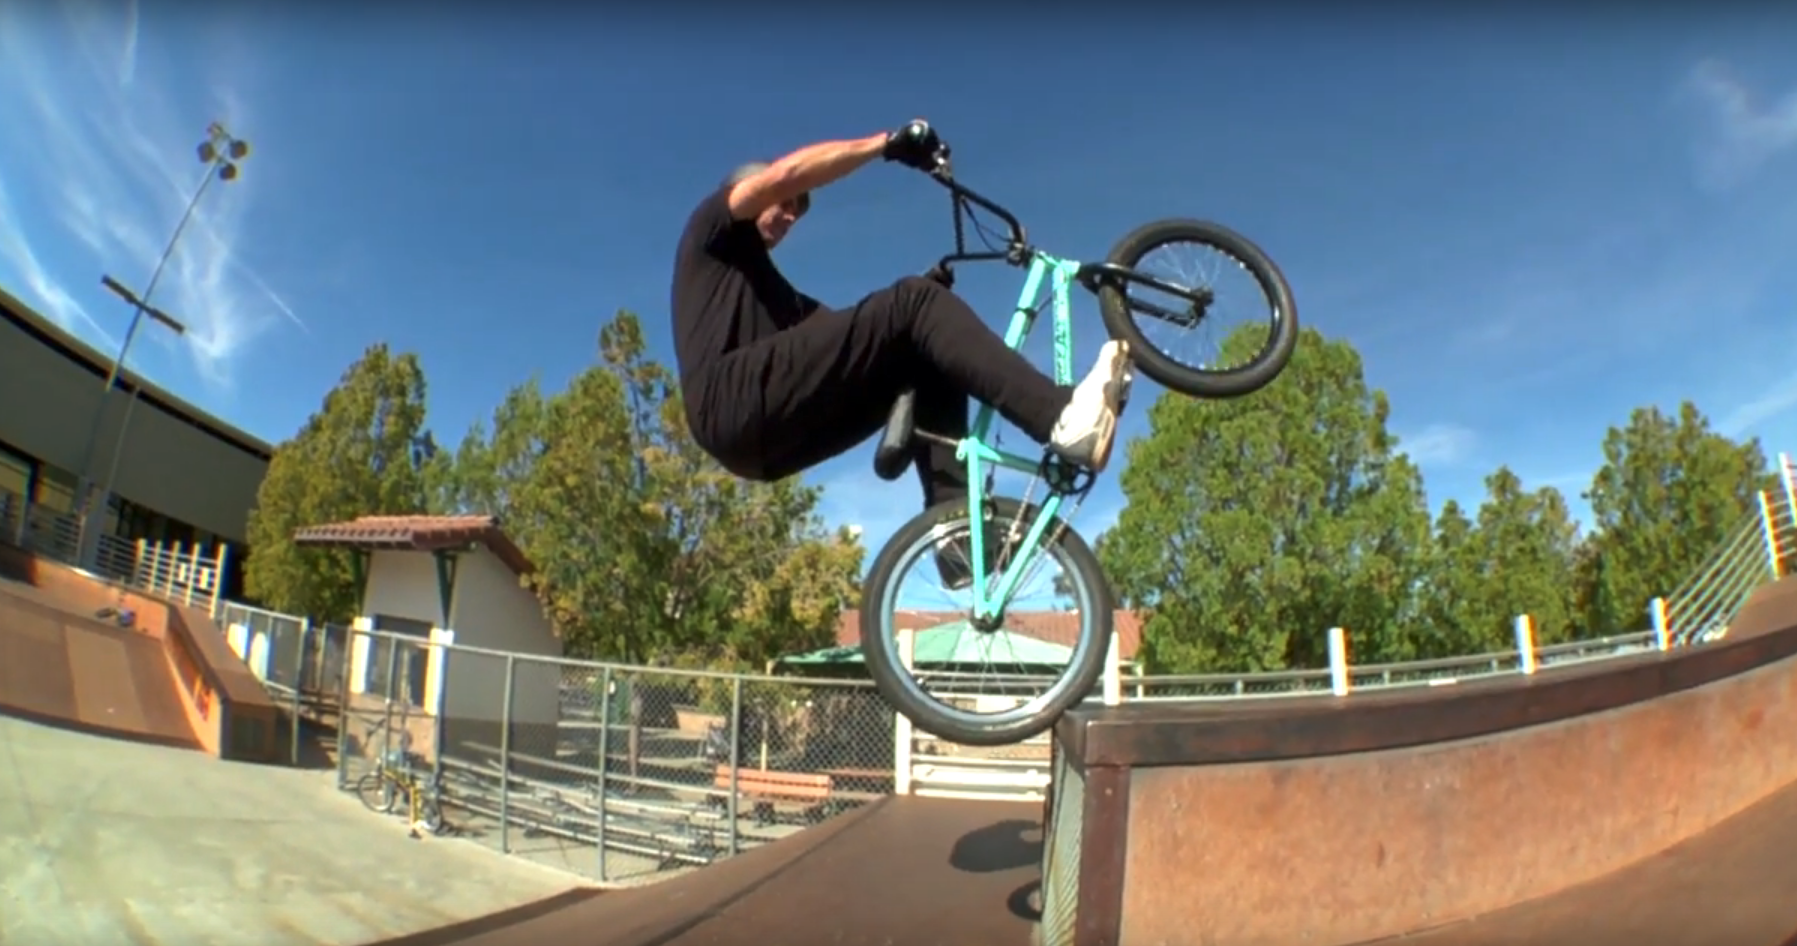 Free Agent rider, Dustin McCarty, riding ramps.